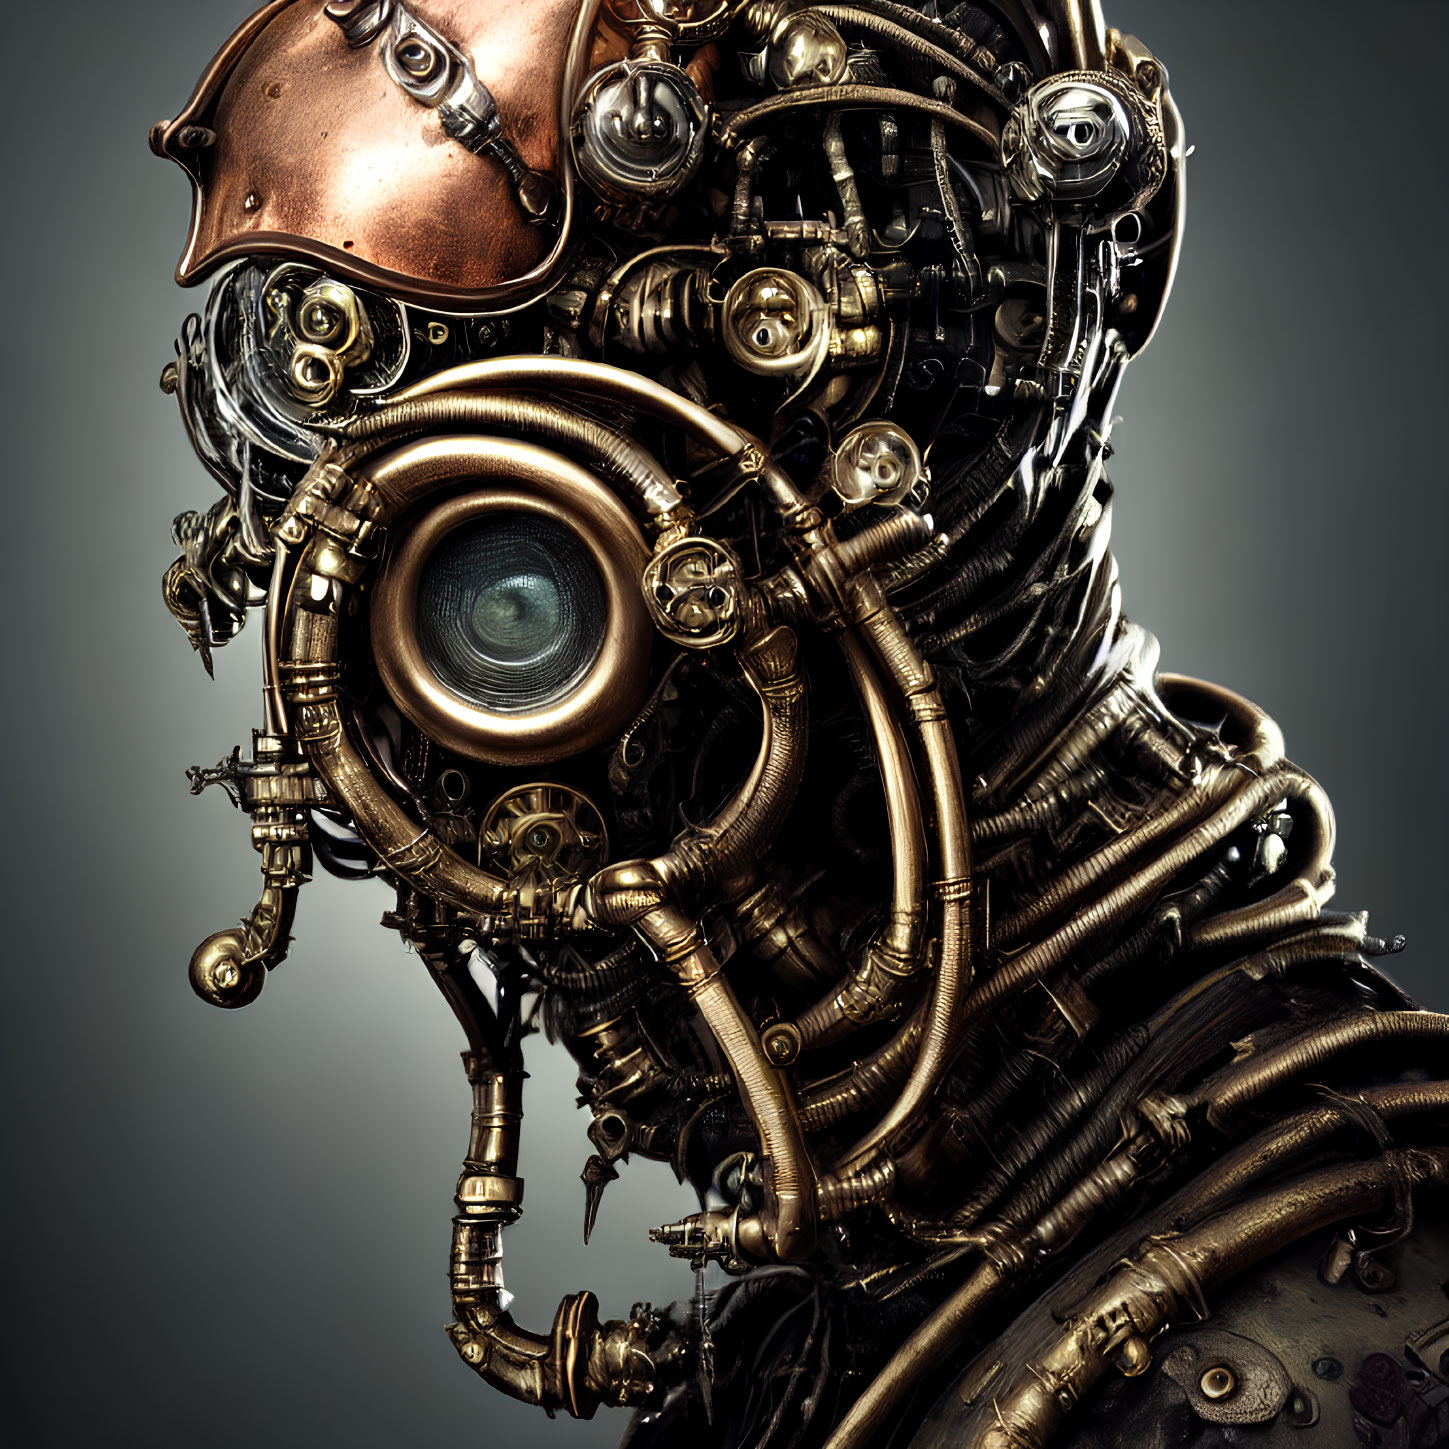 Steampunk-style robotic head with brass pipes and gears on grey background